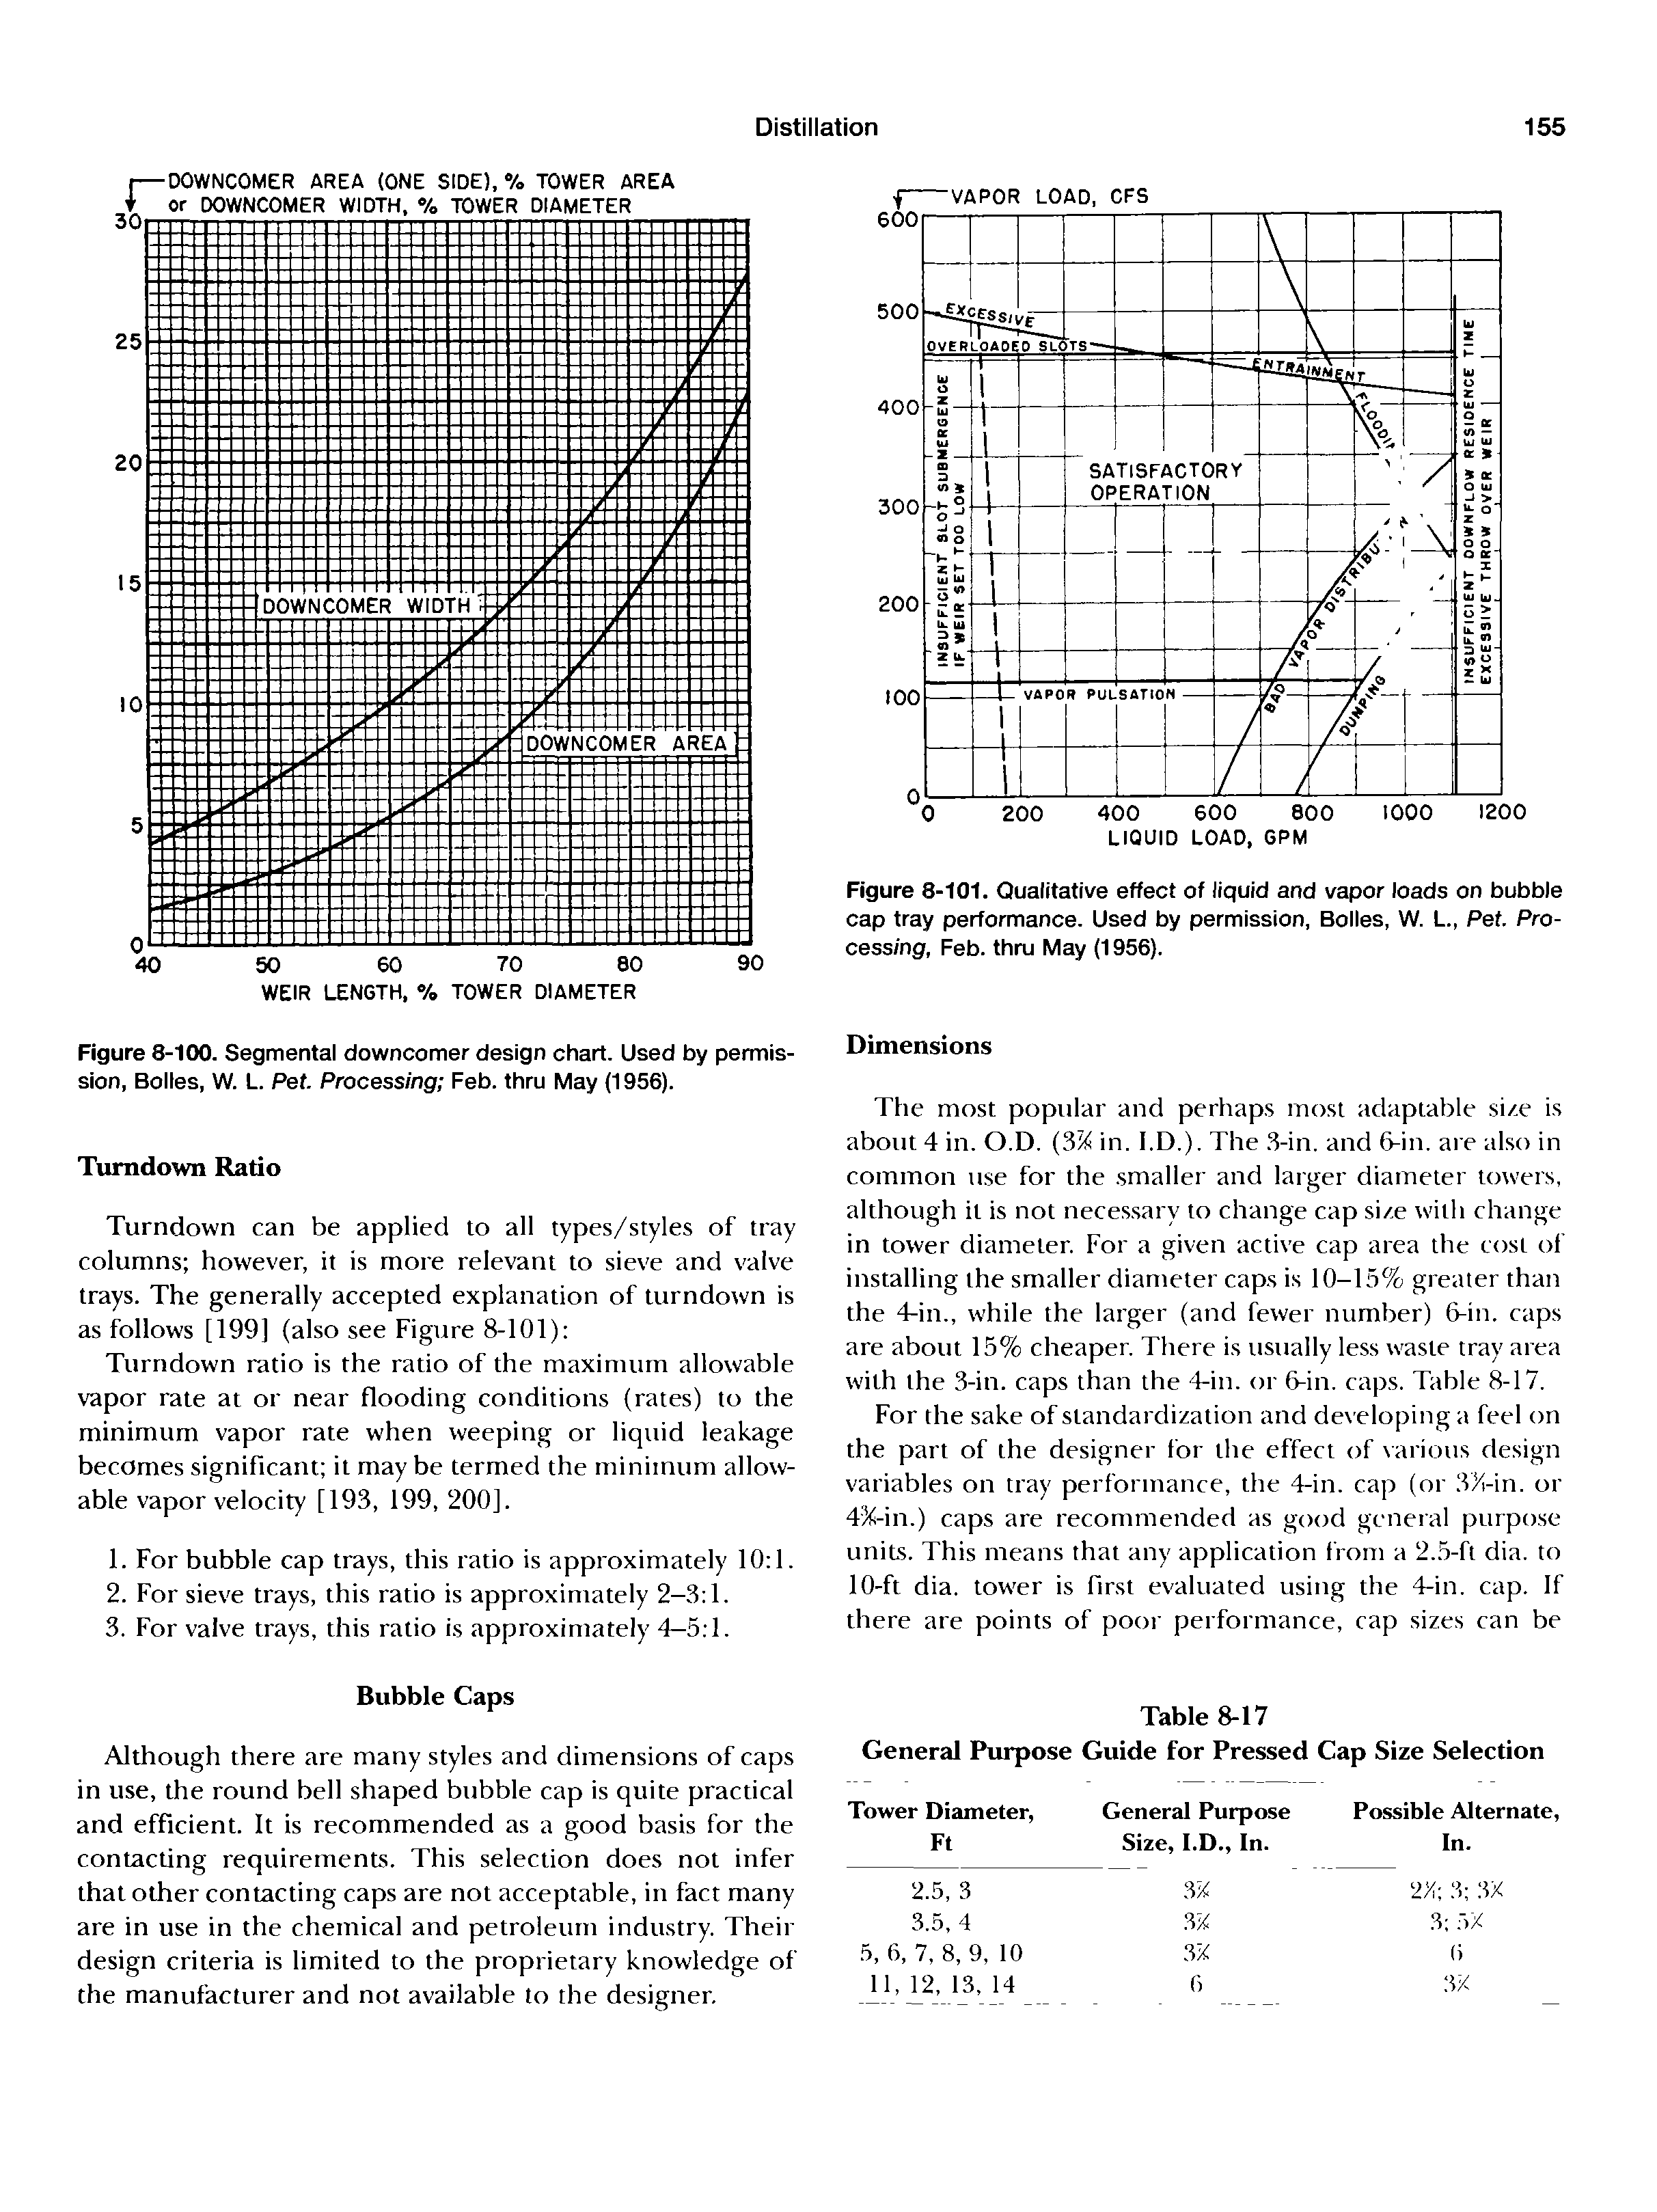 Figure 8-101. Qualitative effect of liquid and vapor loads on bubble cap tray performance. Used by permission, Bolles, W. L., Pet. Processing, Feb. thm May (1956).